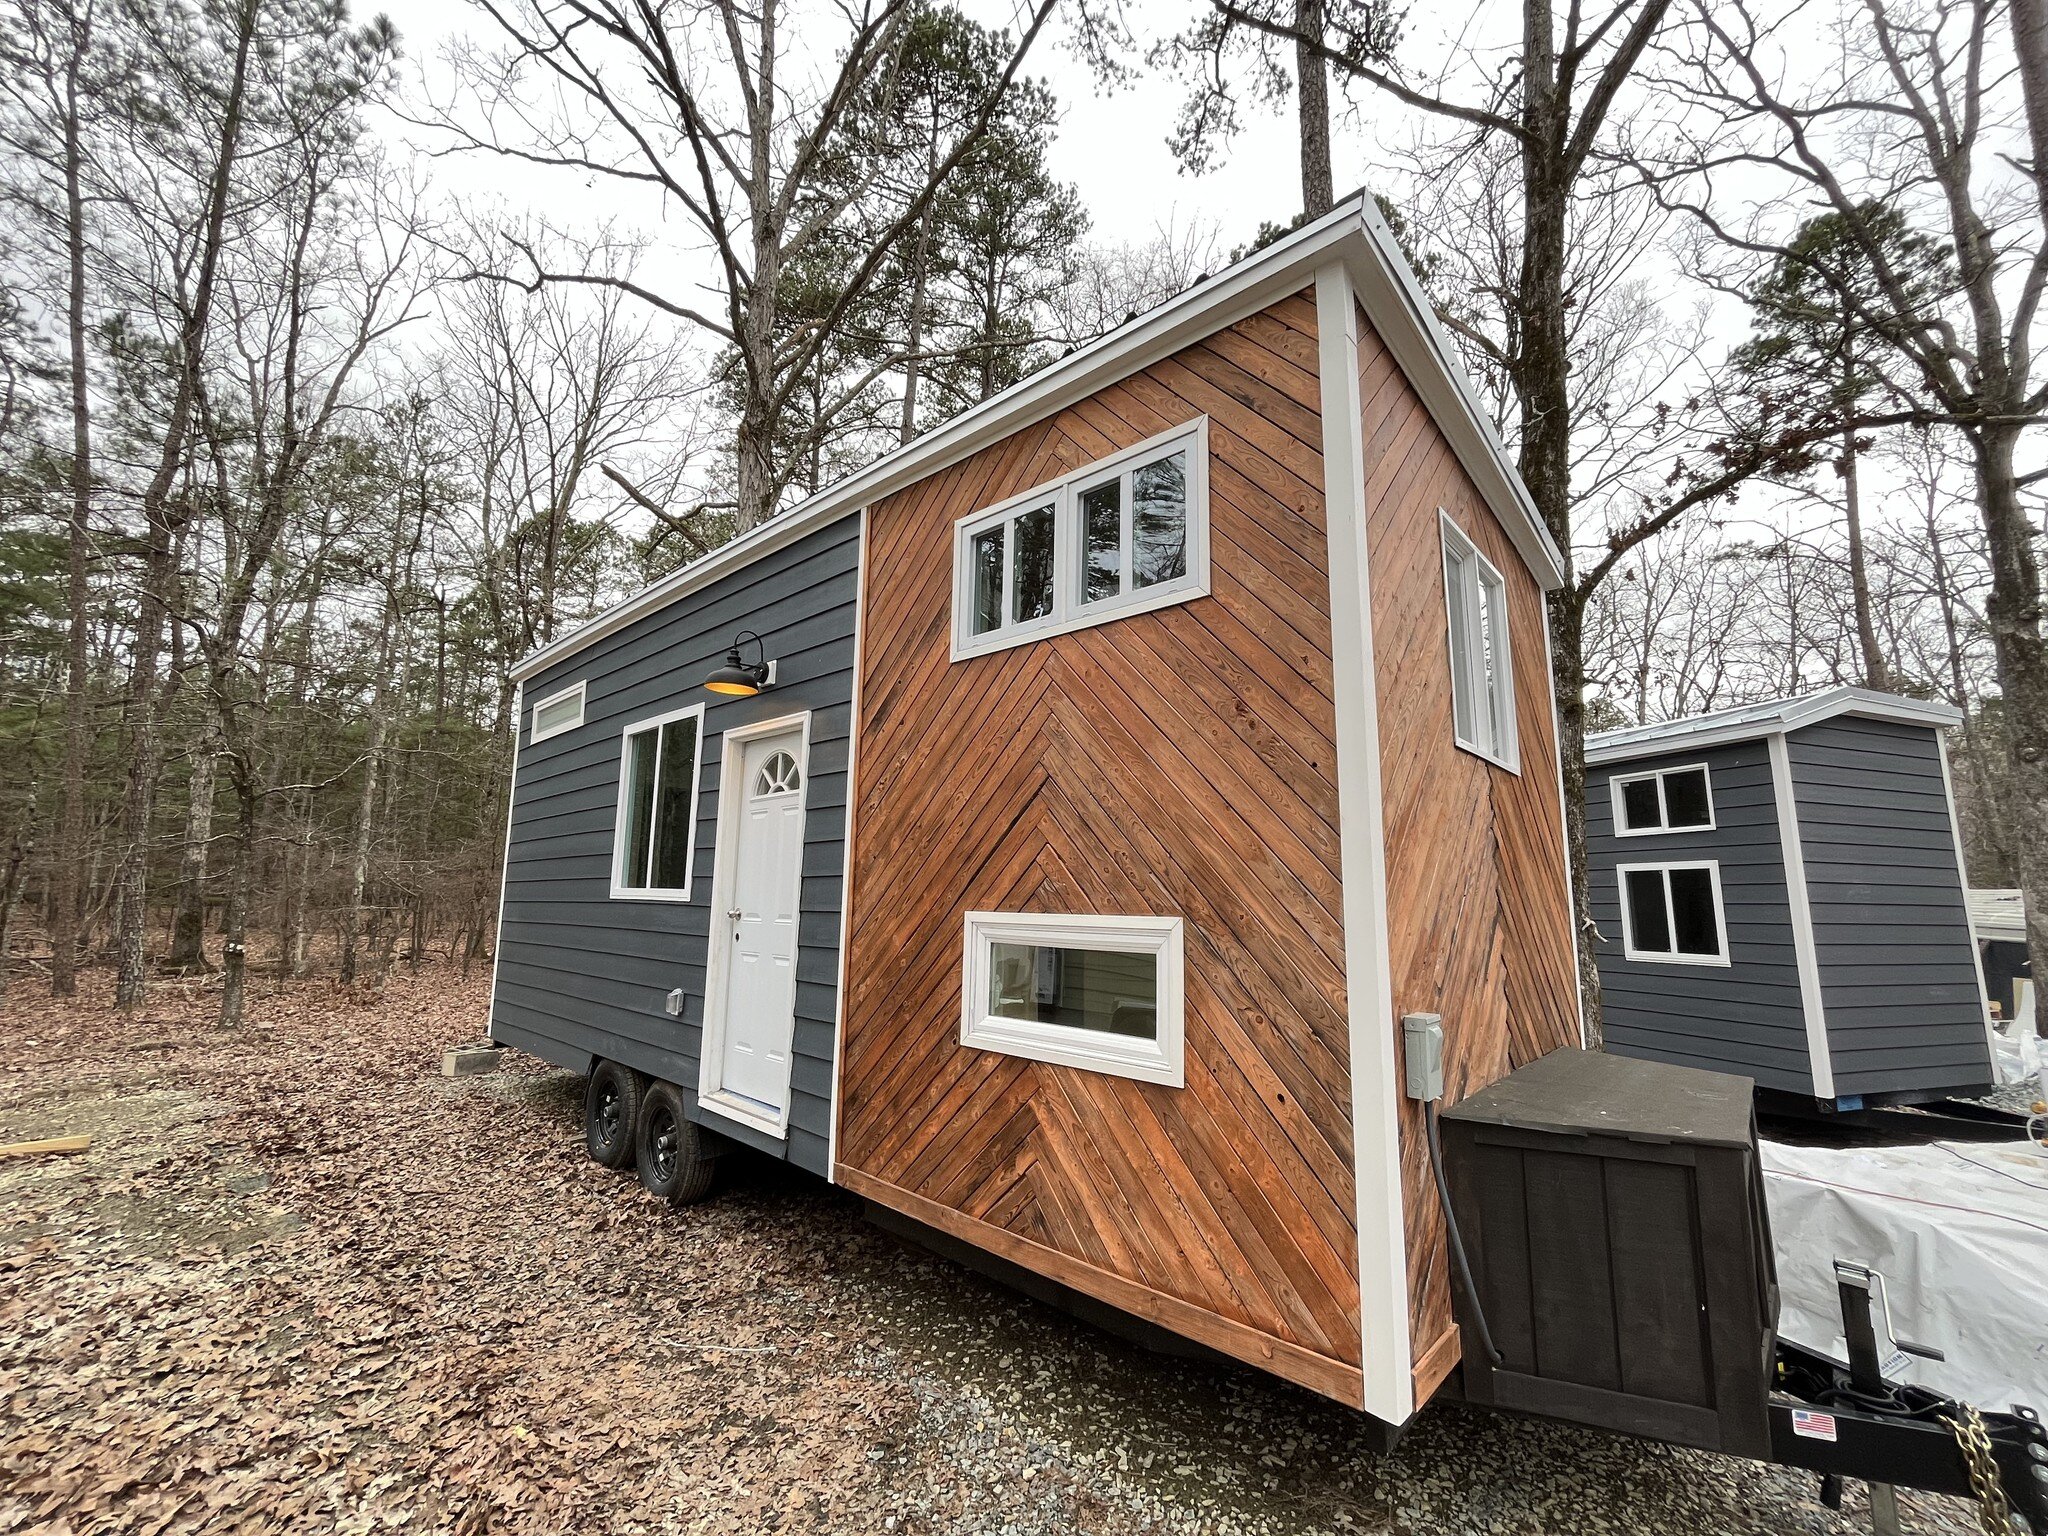 TINY HOME SPOTLIGHT: Little Bear 26'
Looking for a beautiful getaway? Look no further with this tiny home that packs a punch in 26 feet! Amazing wood accents throughout the home create a true lake retreat. High-end finishes make it an ideal space to 